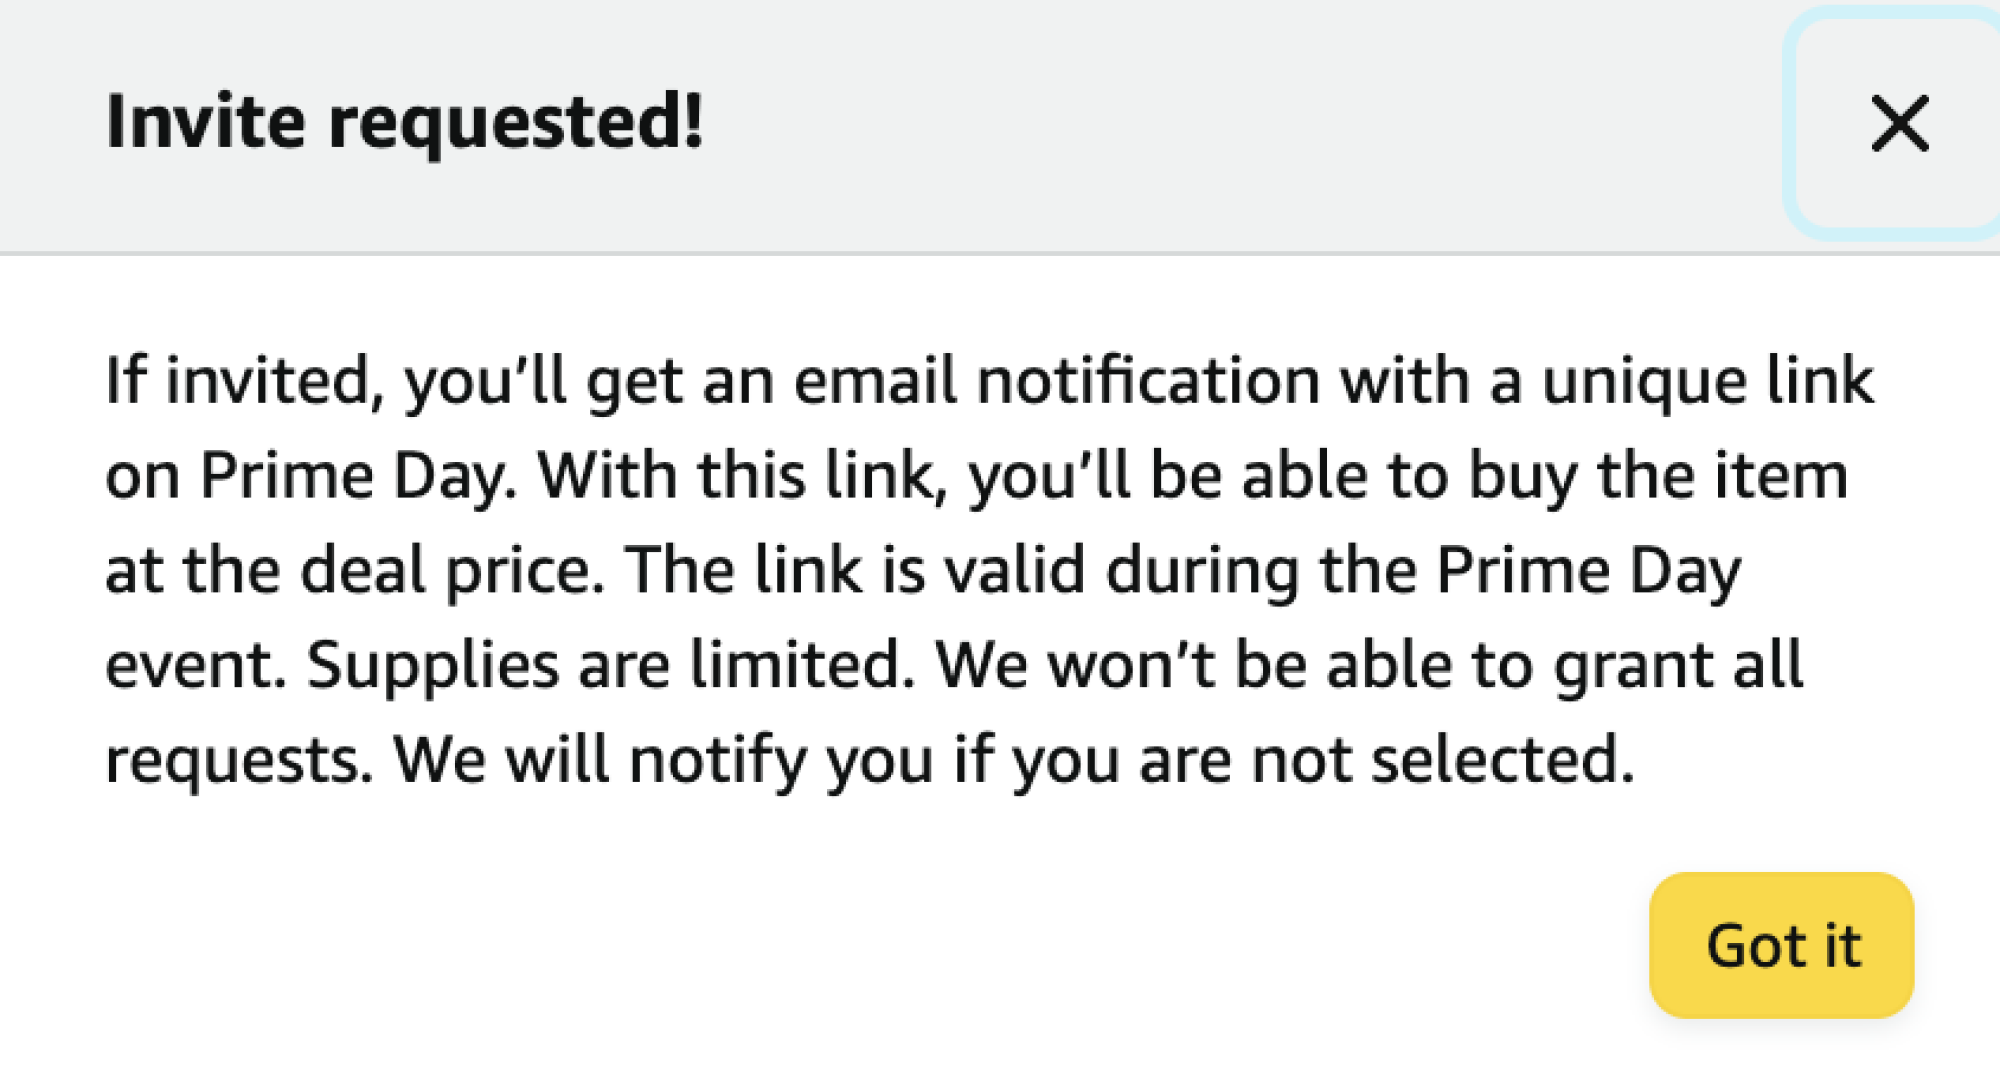 invite requested notification from amazon